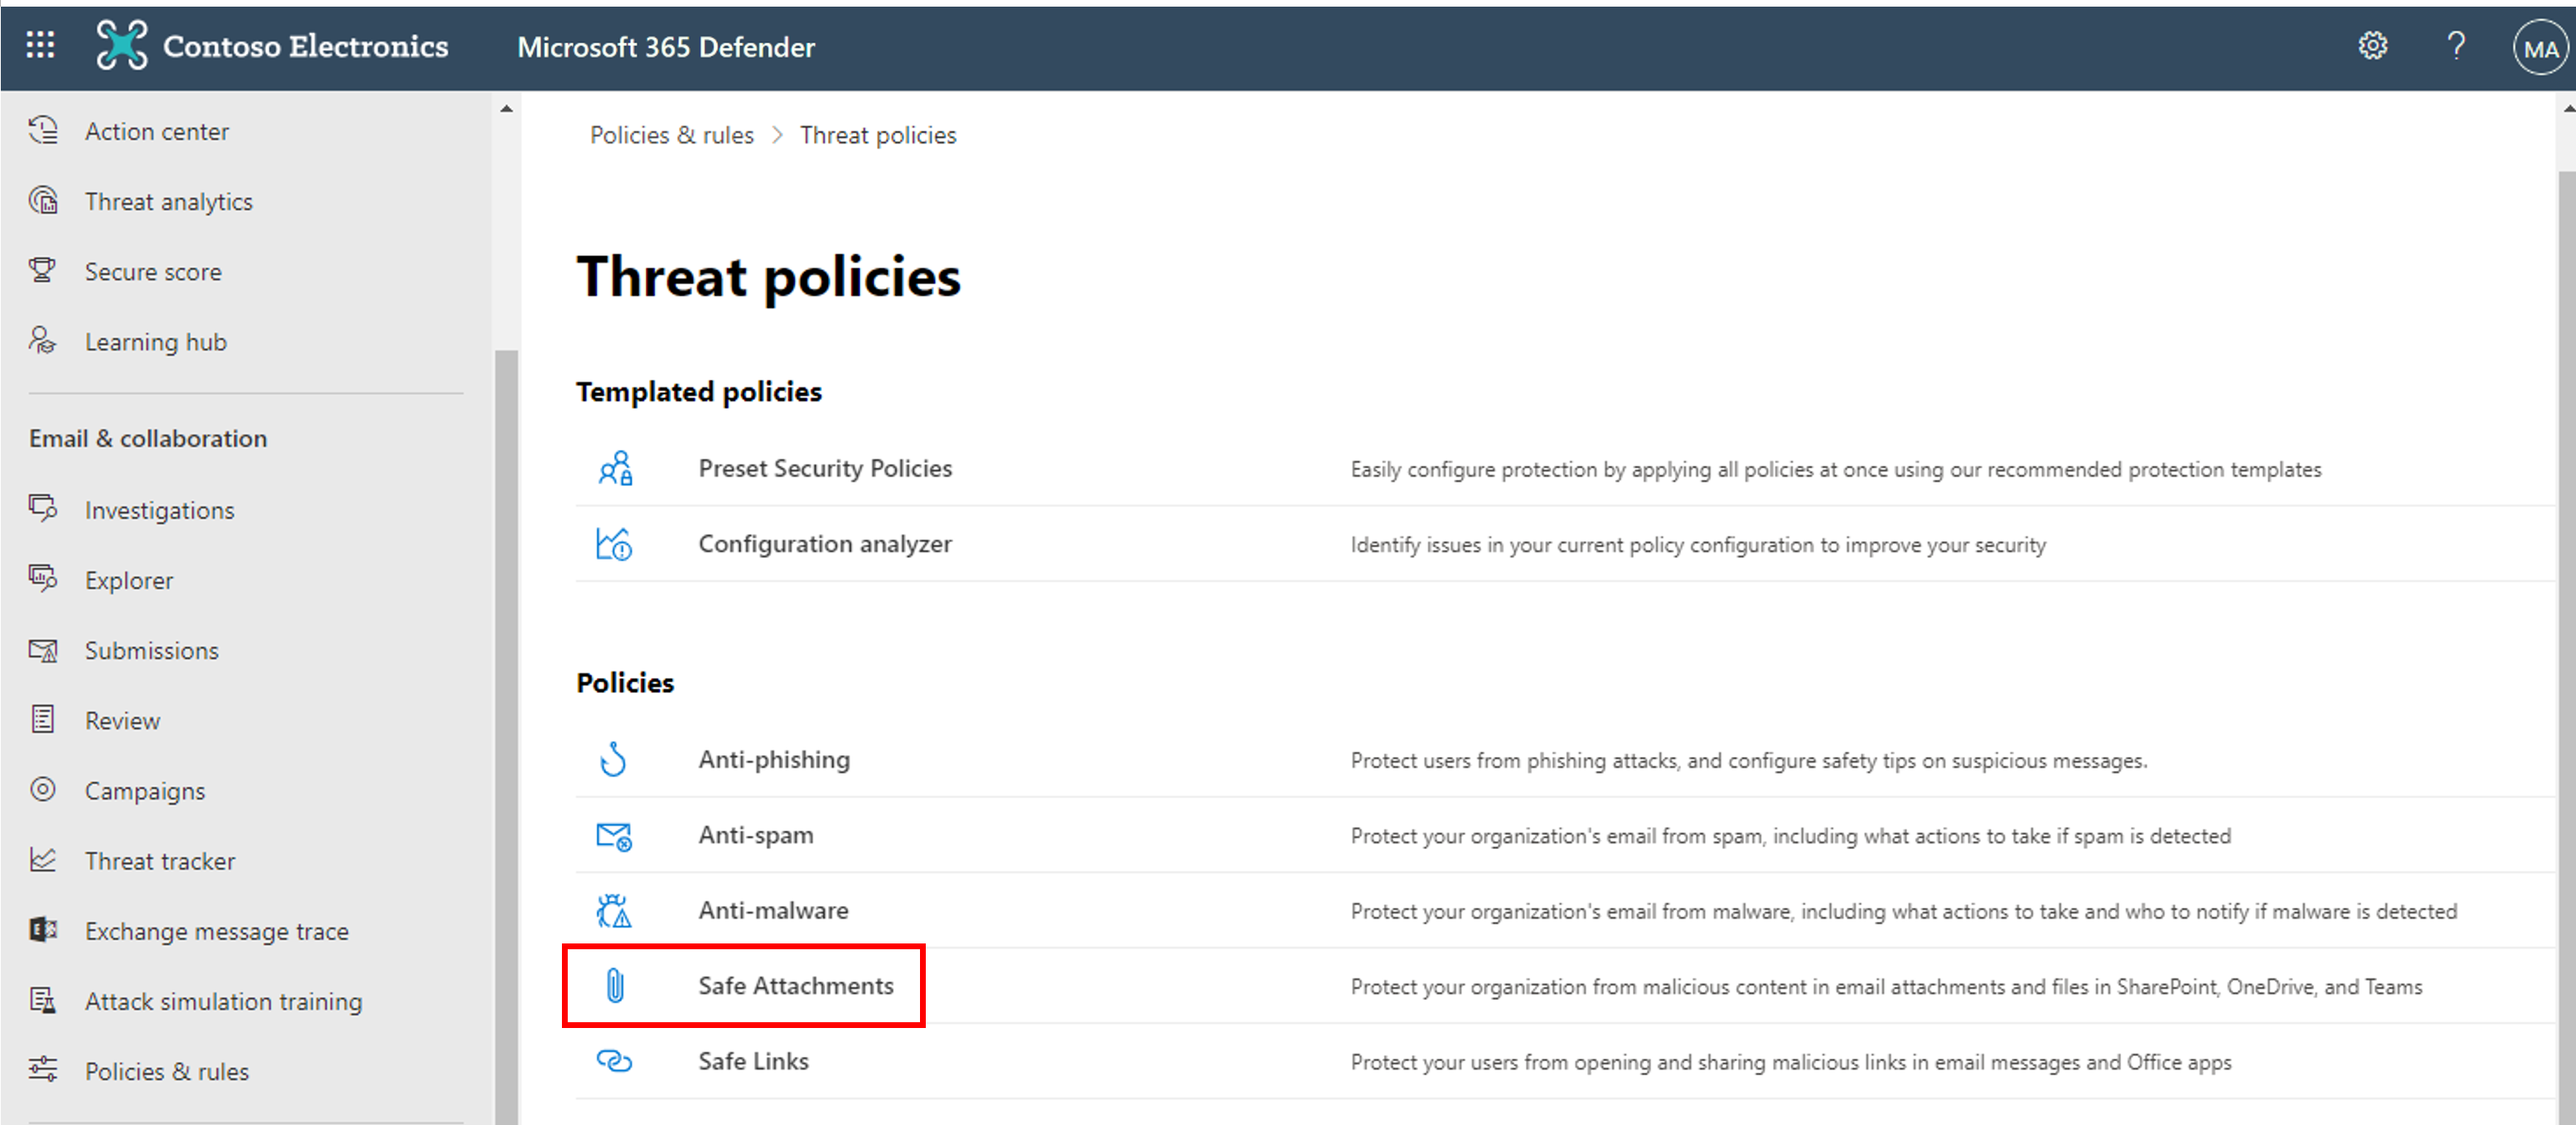 Screenshot of Safe attachments in Threat Policies page.